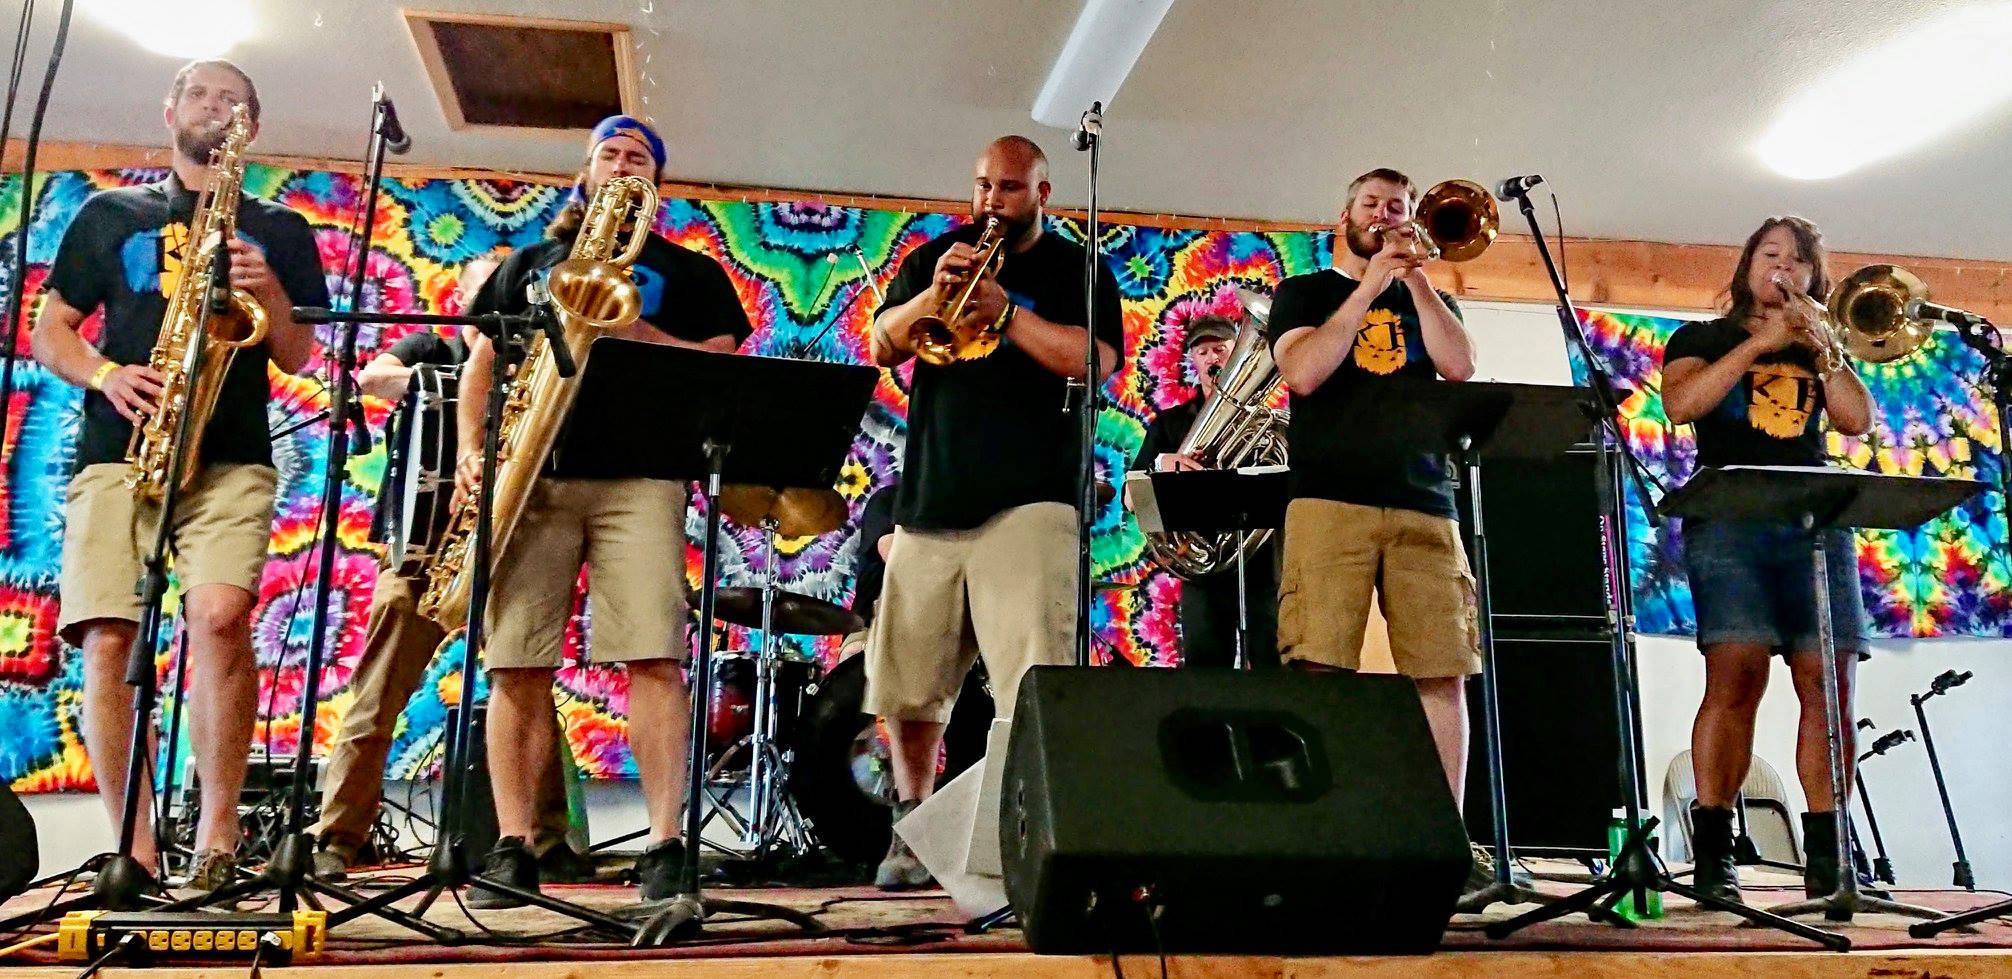 Members of the KP Brass Band perform at Salmonfest in 2018. (Photo provided)